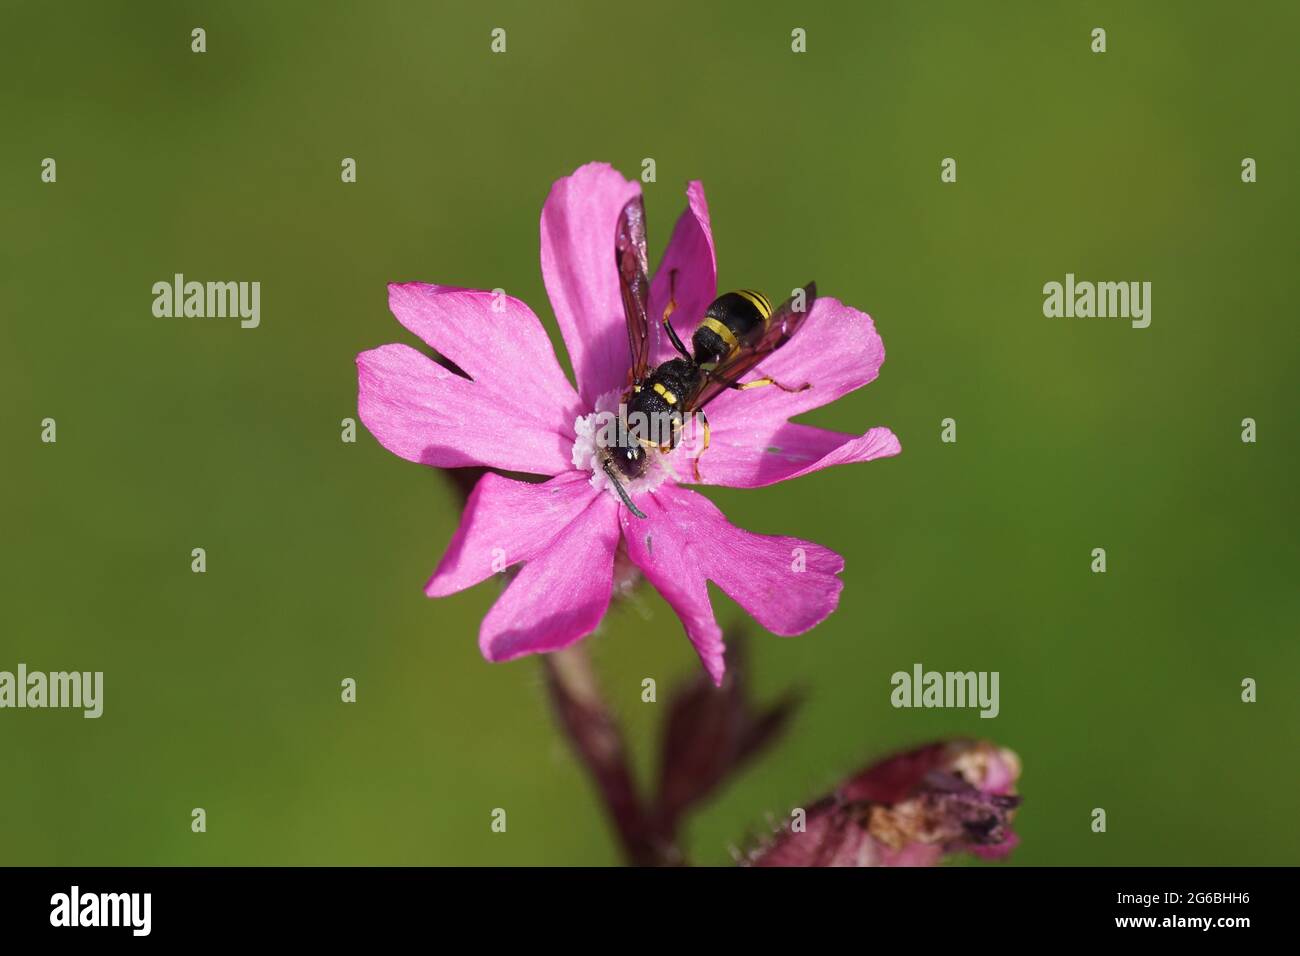 otter wasp Ancistrocerus, subfamily Eumeninae, family Vespidae. On a flower of red campion, red catchfly (Silene dioica), pink family, carnation famil Stock Photo